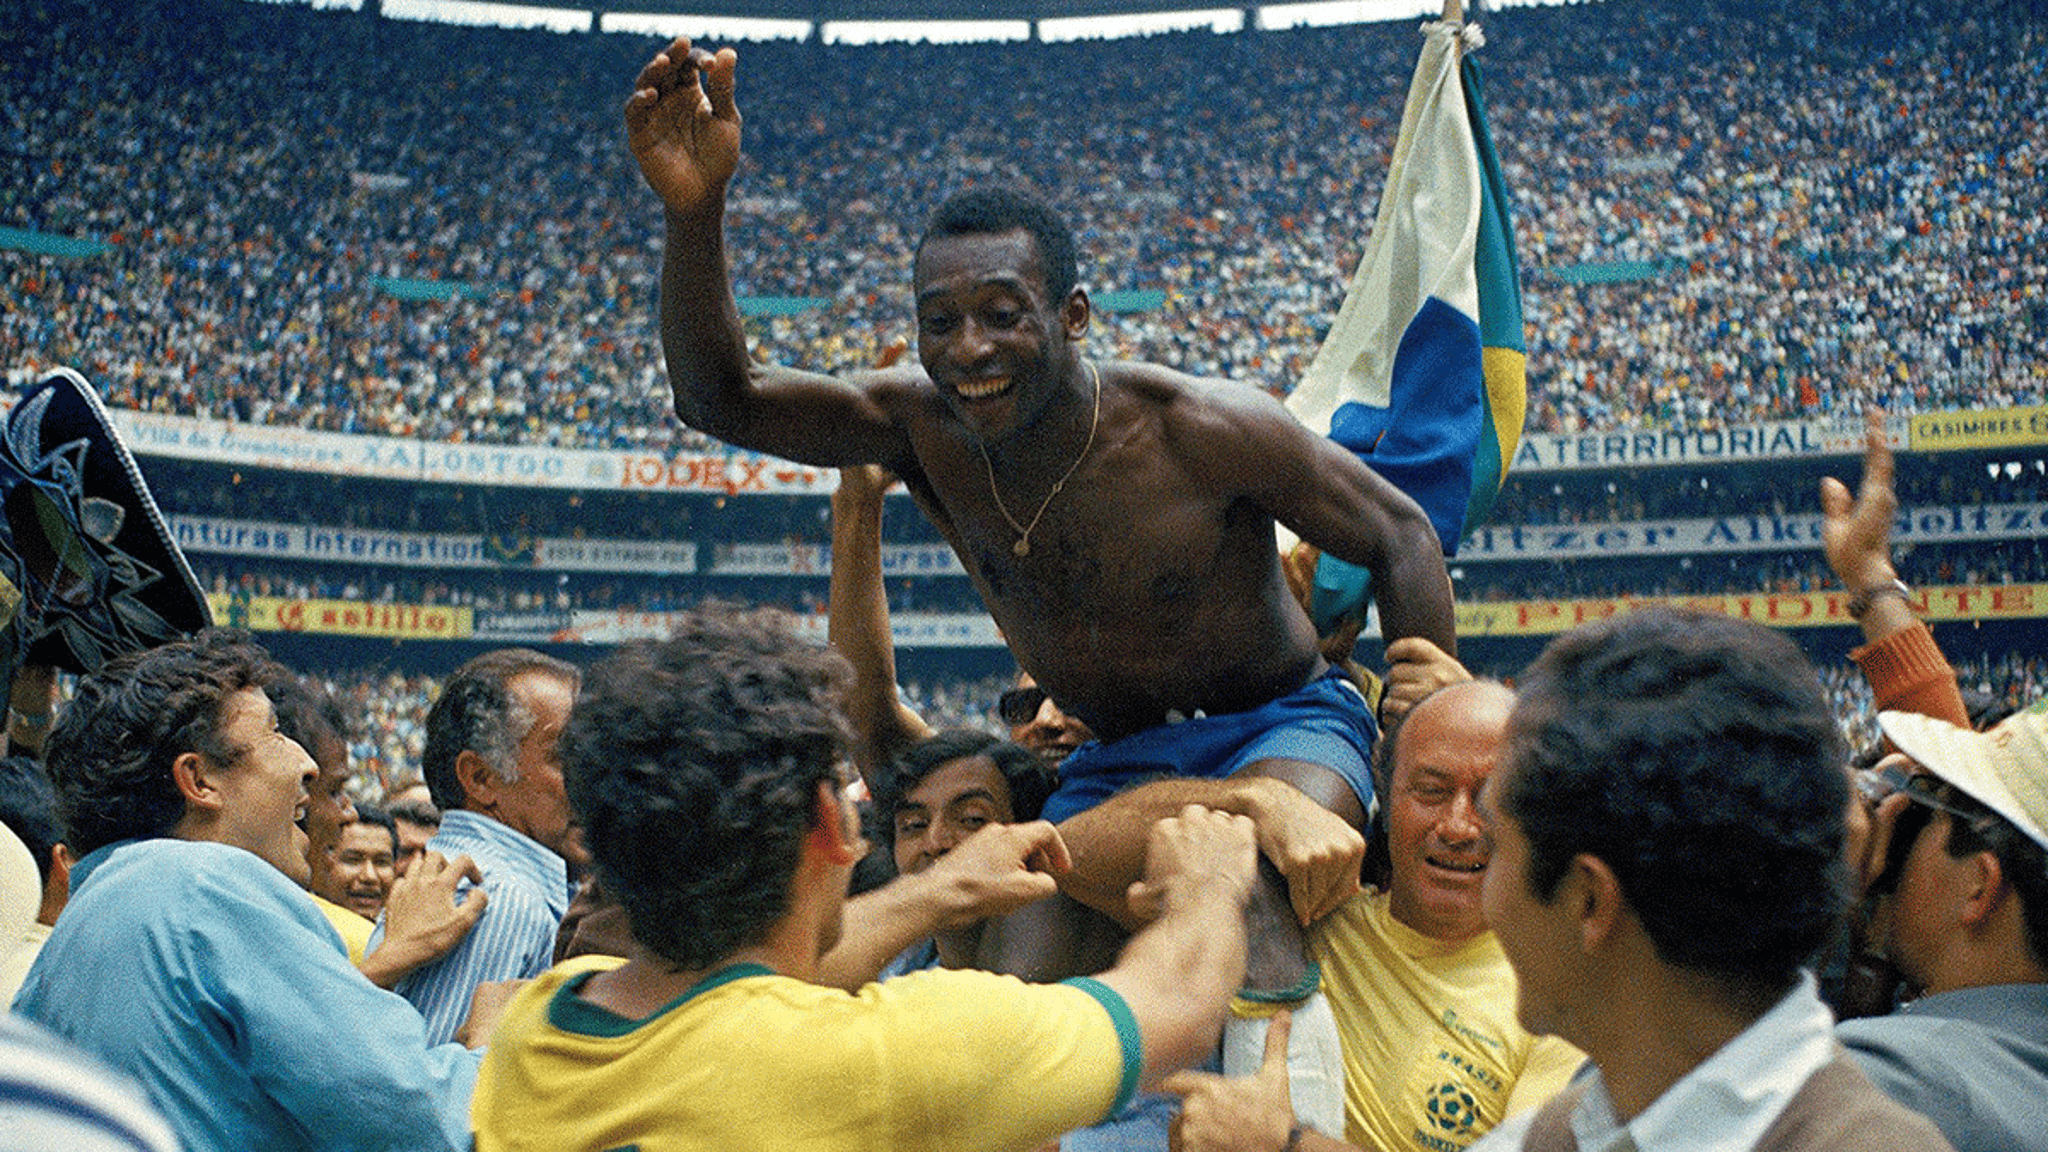 Pele paid $120,000 to tie shoes at World Cup, sparking feud between Puma and Adidas